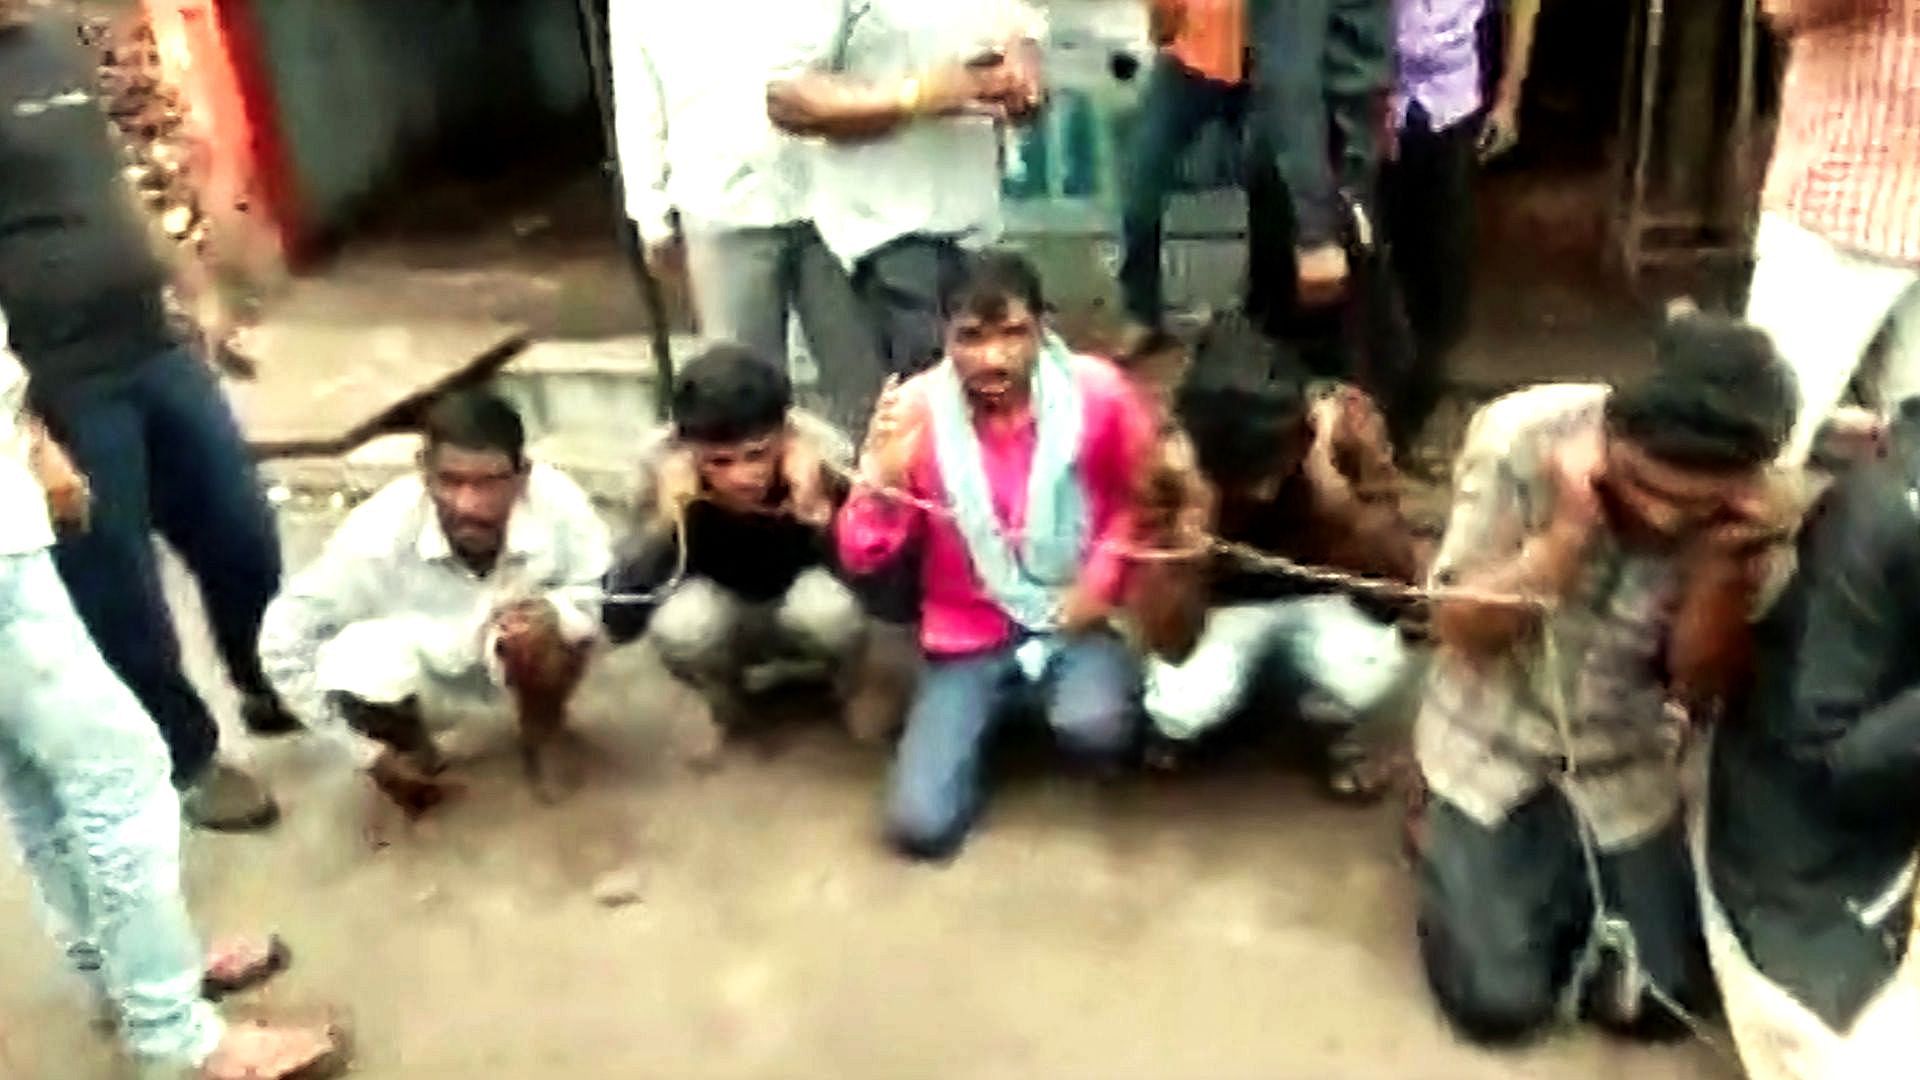 Several villagers forced the alleged cattle movers to do sit-ups holding their ears amid cries of “Gau Mata Ki Jai”.